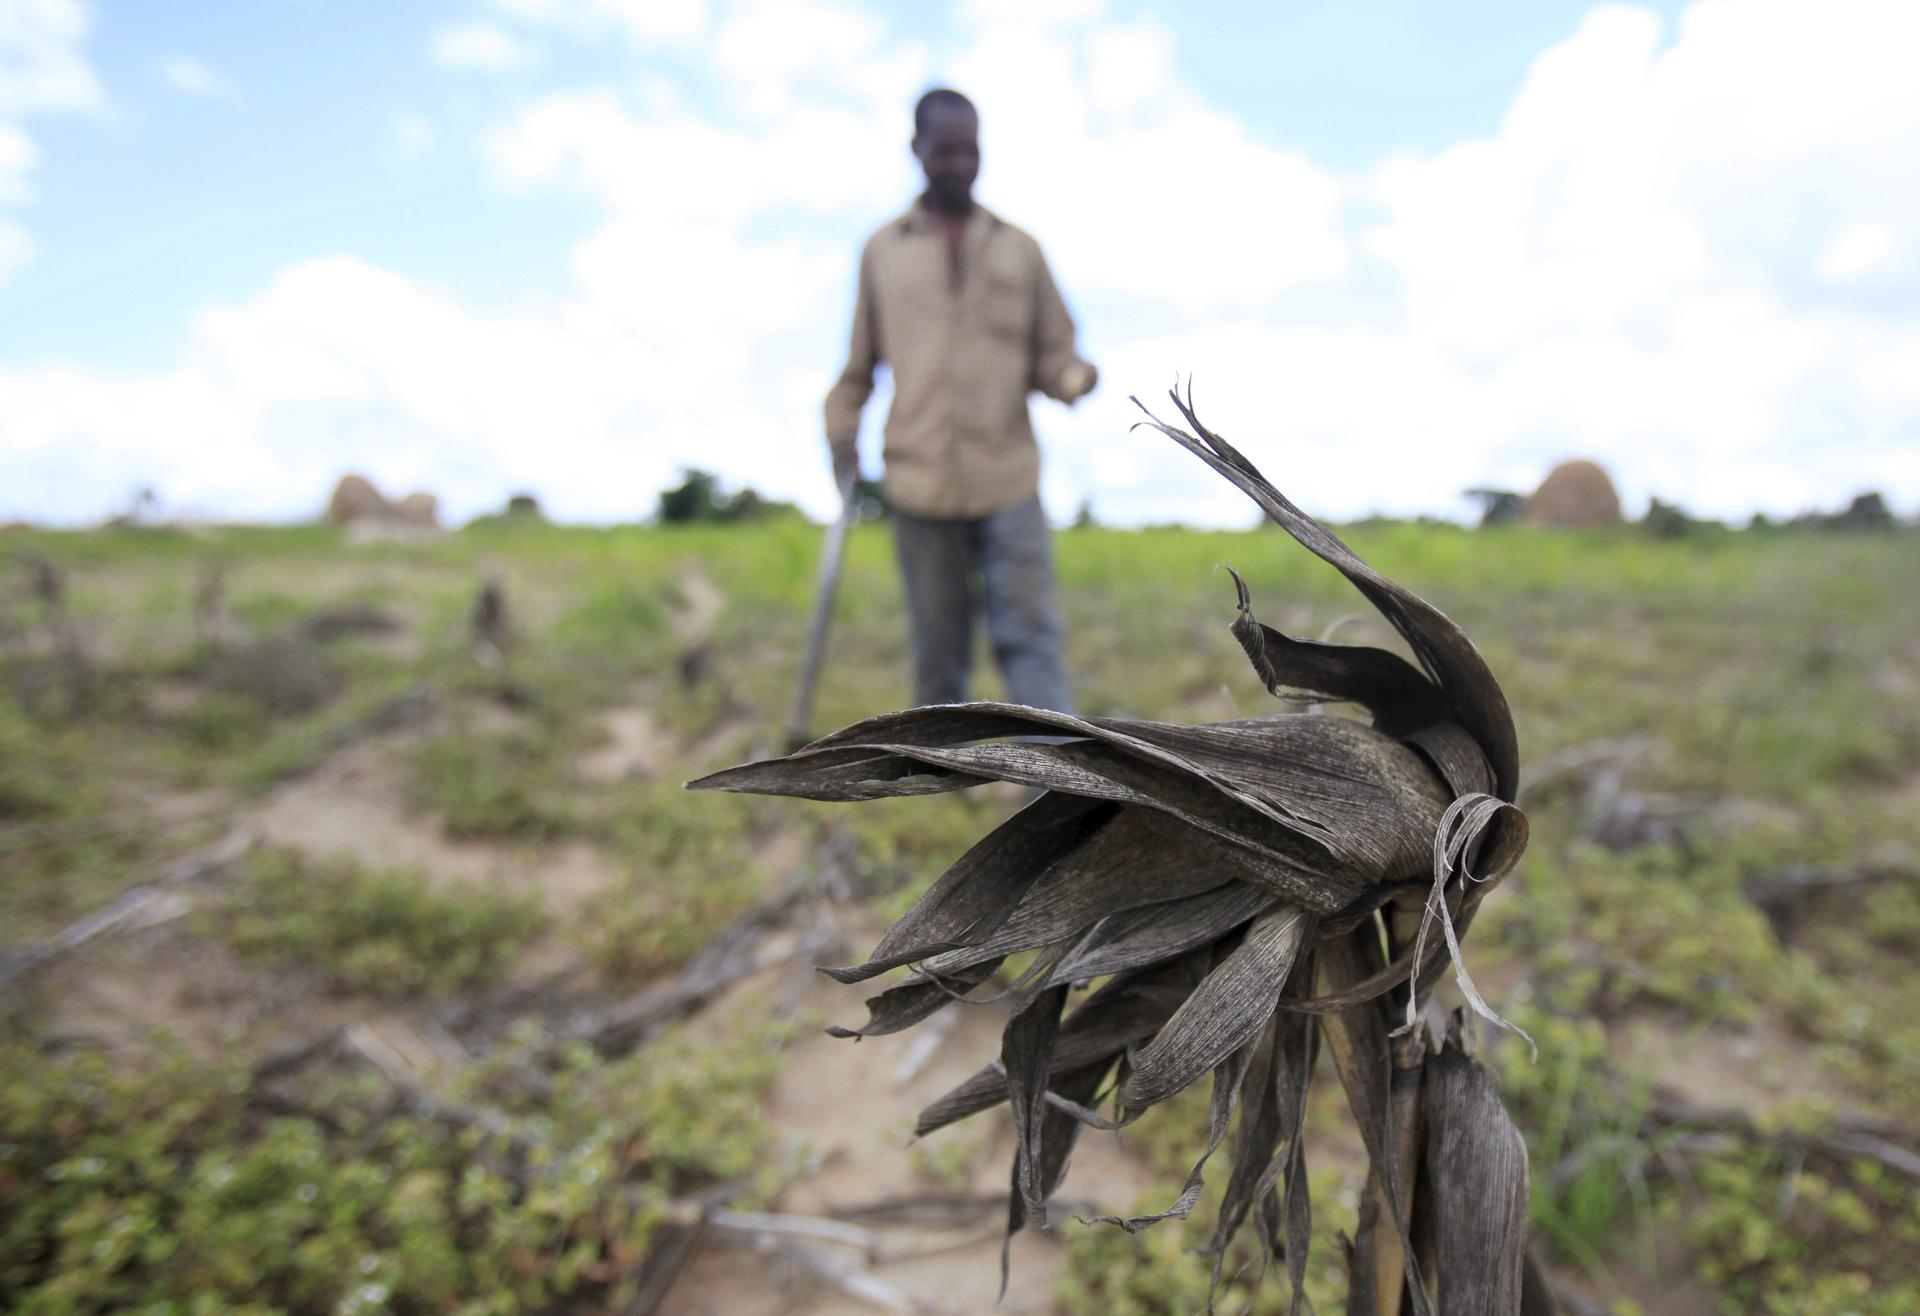 The UN World Food Program says about 14 million people face hunger across Southern Africa because of the current drought, including more than 10 percent of the population in Zimbabwe, where this farmer surveyed his withered corn crop in late January.